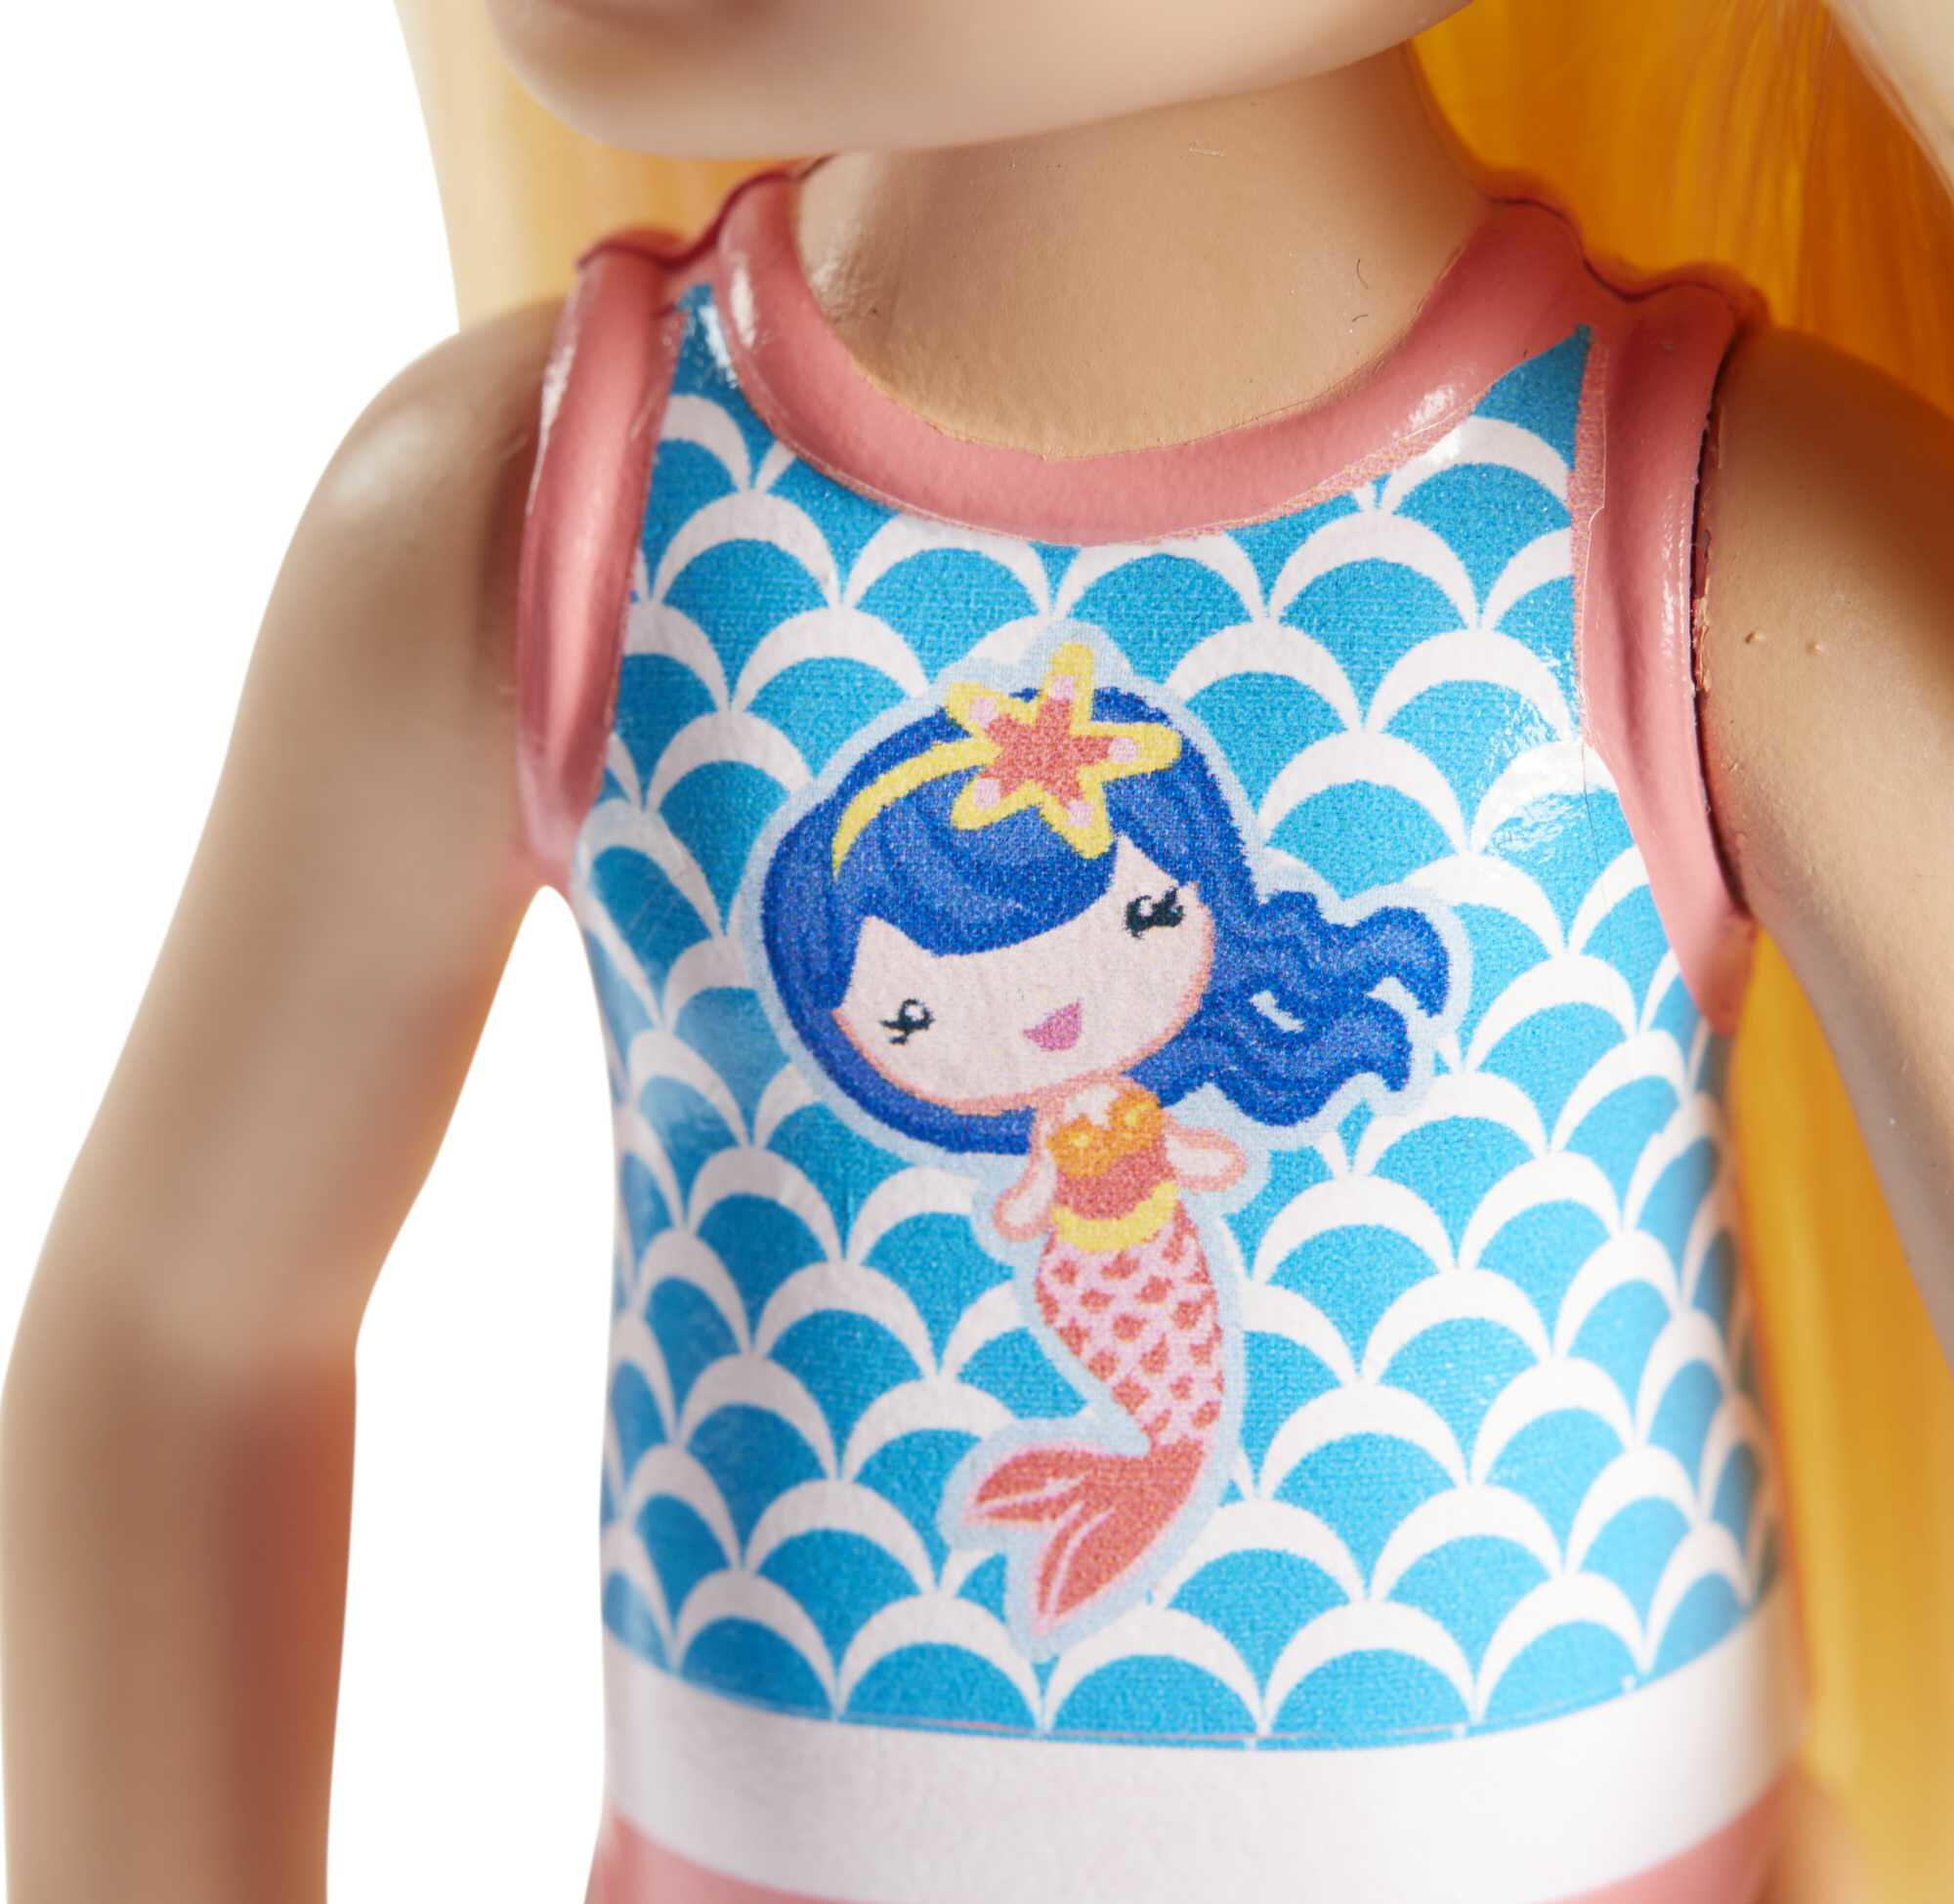 Barbie Club Chelsea Doll, Small Doll with Long Blonde Hair, Blue Eyes & Mermaid-Graphic Swimsuit - image 3 of 5